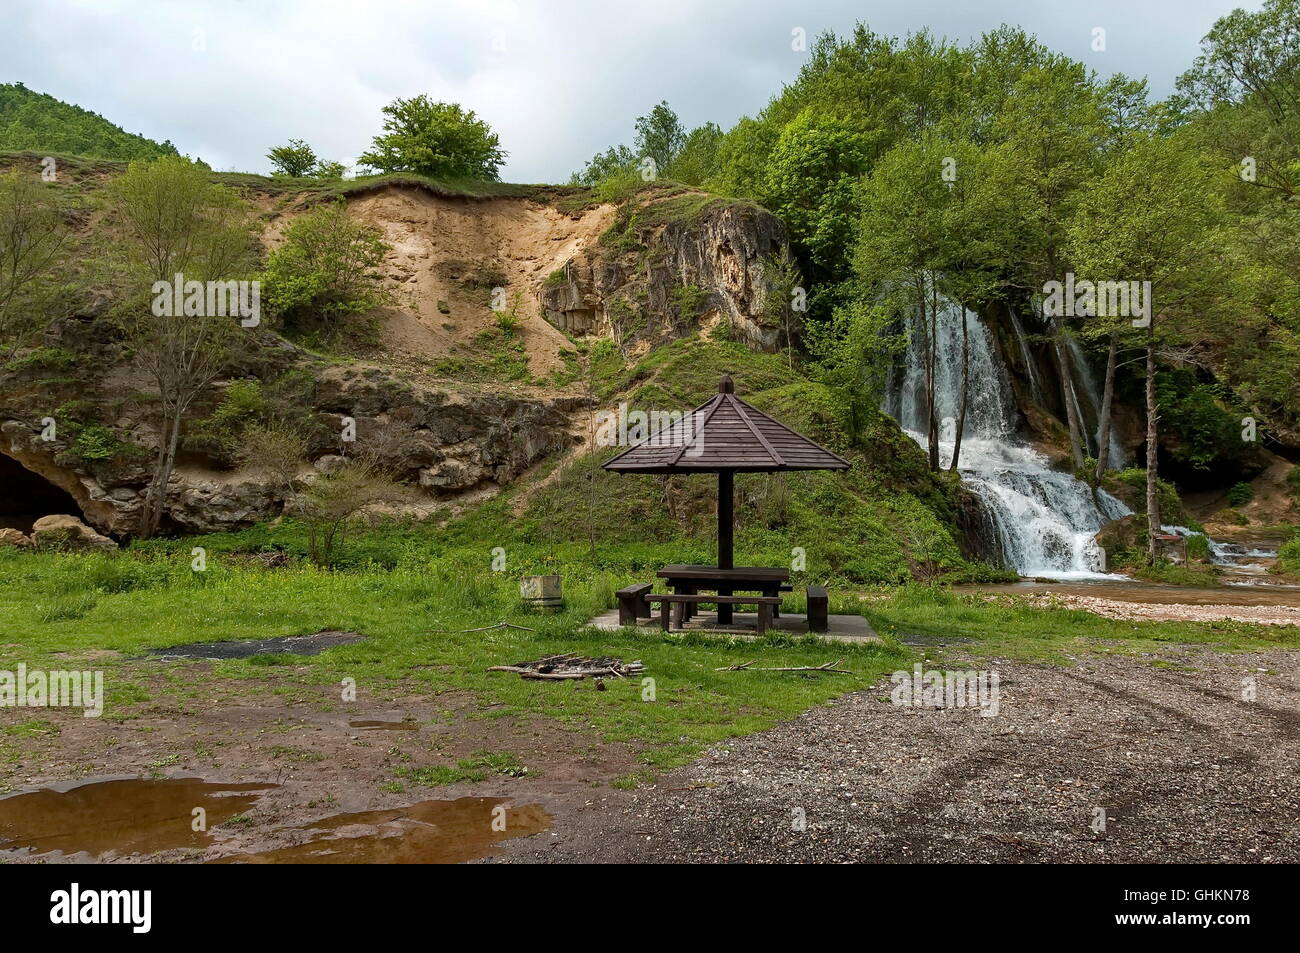 River Bigar in Serbia - waterfall cascade and summer-house, Europe Stock Photo